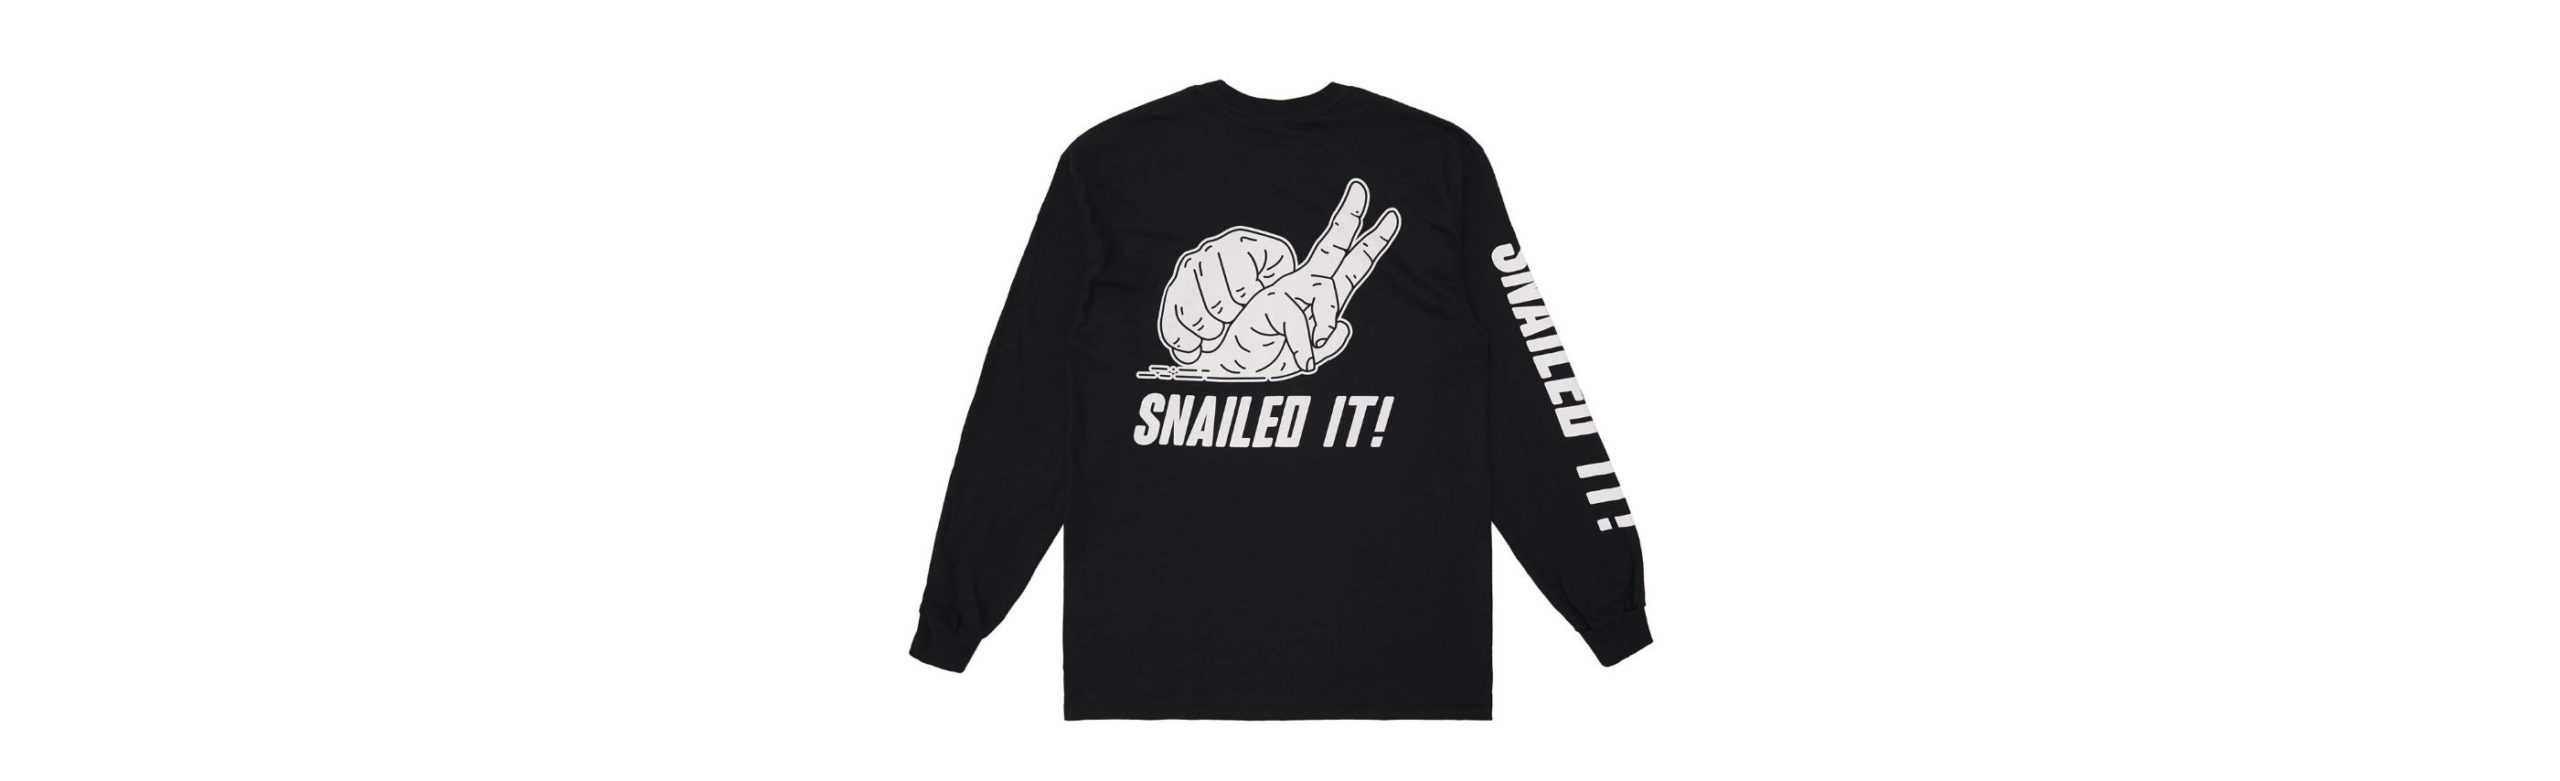 Snails Tickets + “Snailed It!” Long Sleeve Tee Giveaway Image